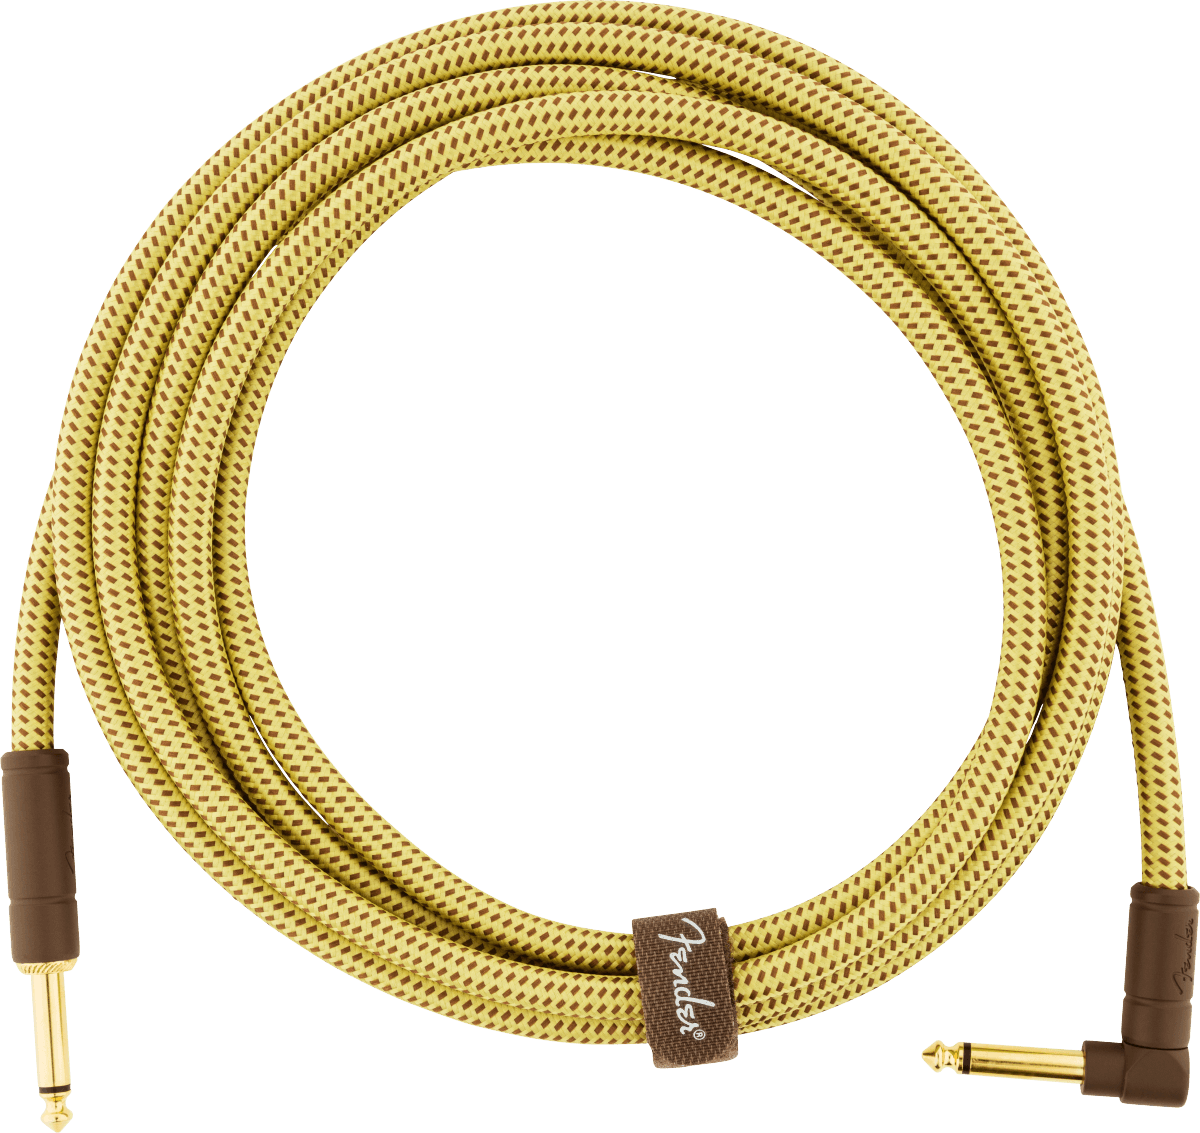 Deluxe Series Instrument Cable Straight/Angle 10 Tweed - Muso's Stuff